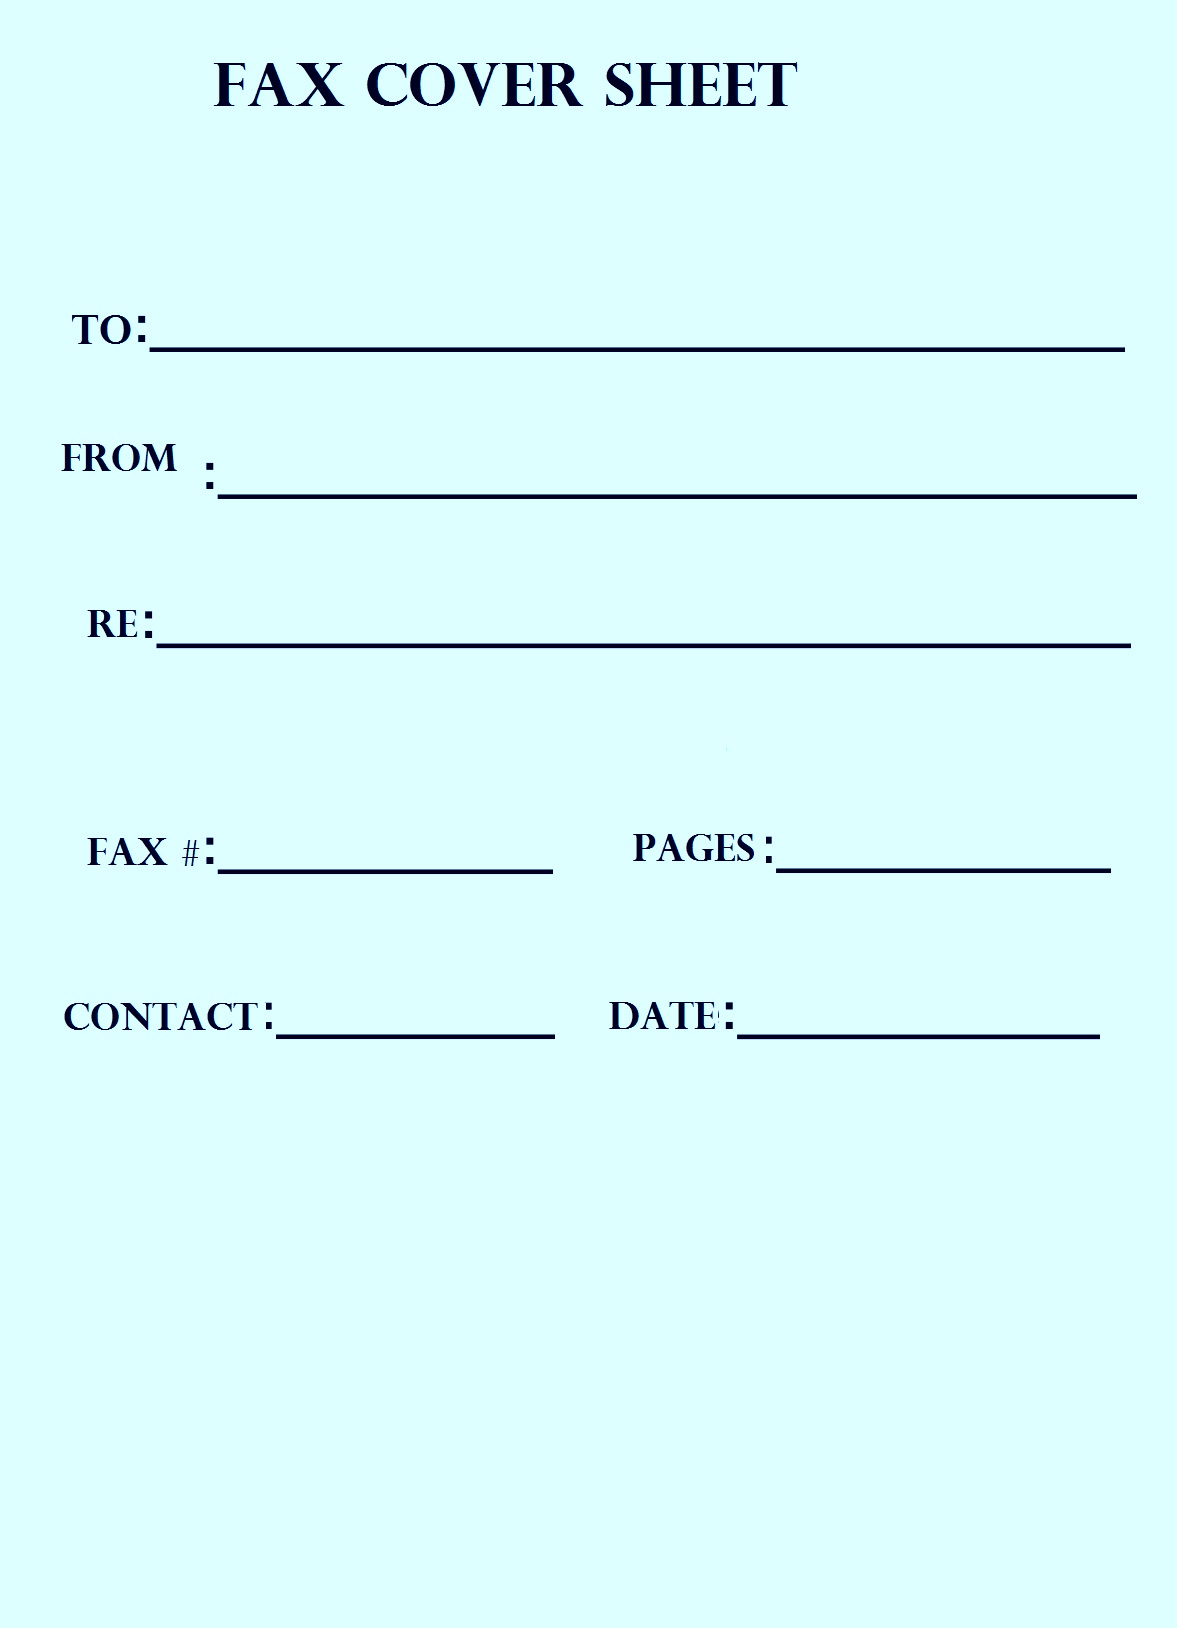 free-standard-fax-cover-sheet-fax-cover-sheet-printable